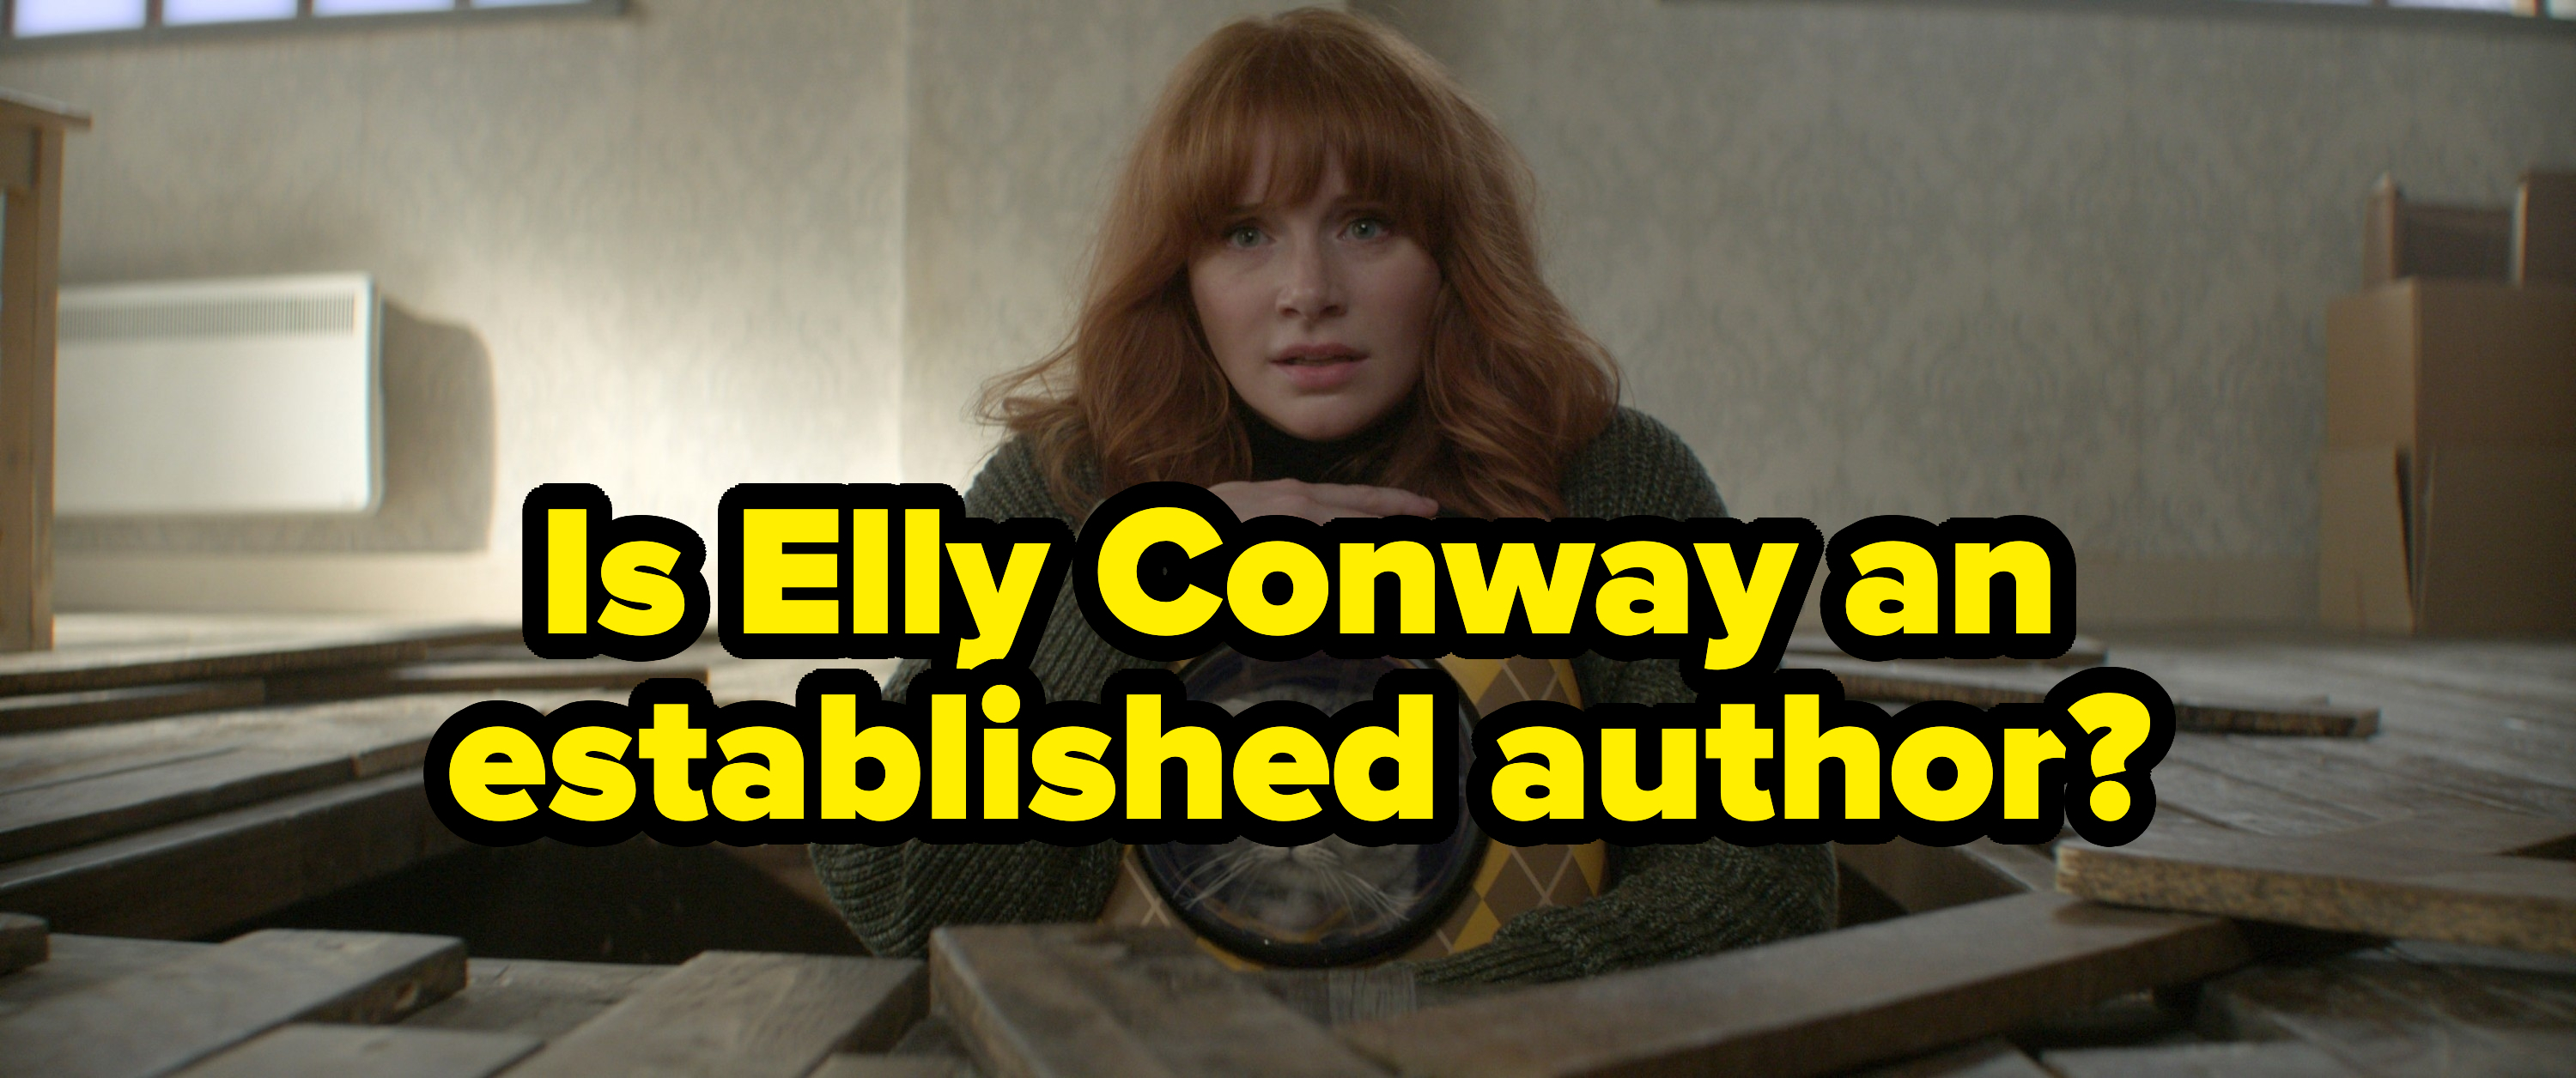 &quot;Is Elly Conway an established author?&quot;